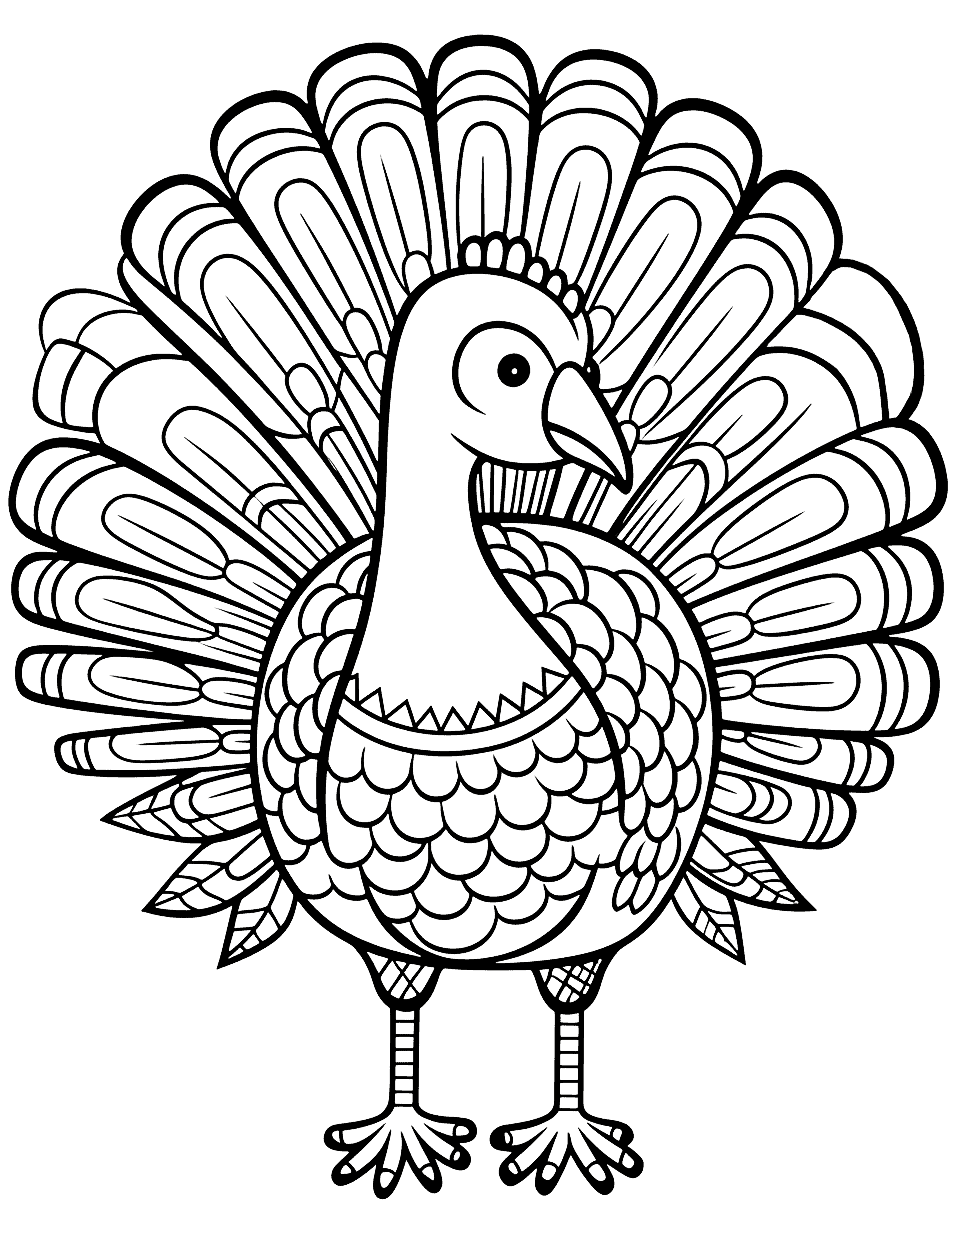 Mandala Inspired Turkey for Kindergarten Coloring Page - A simple mandala pattern within a turkey outline for advanced kids to color.